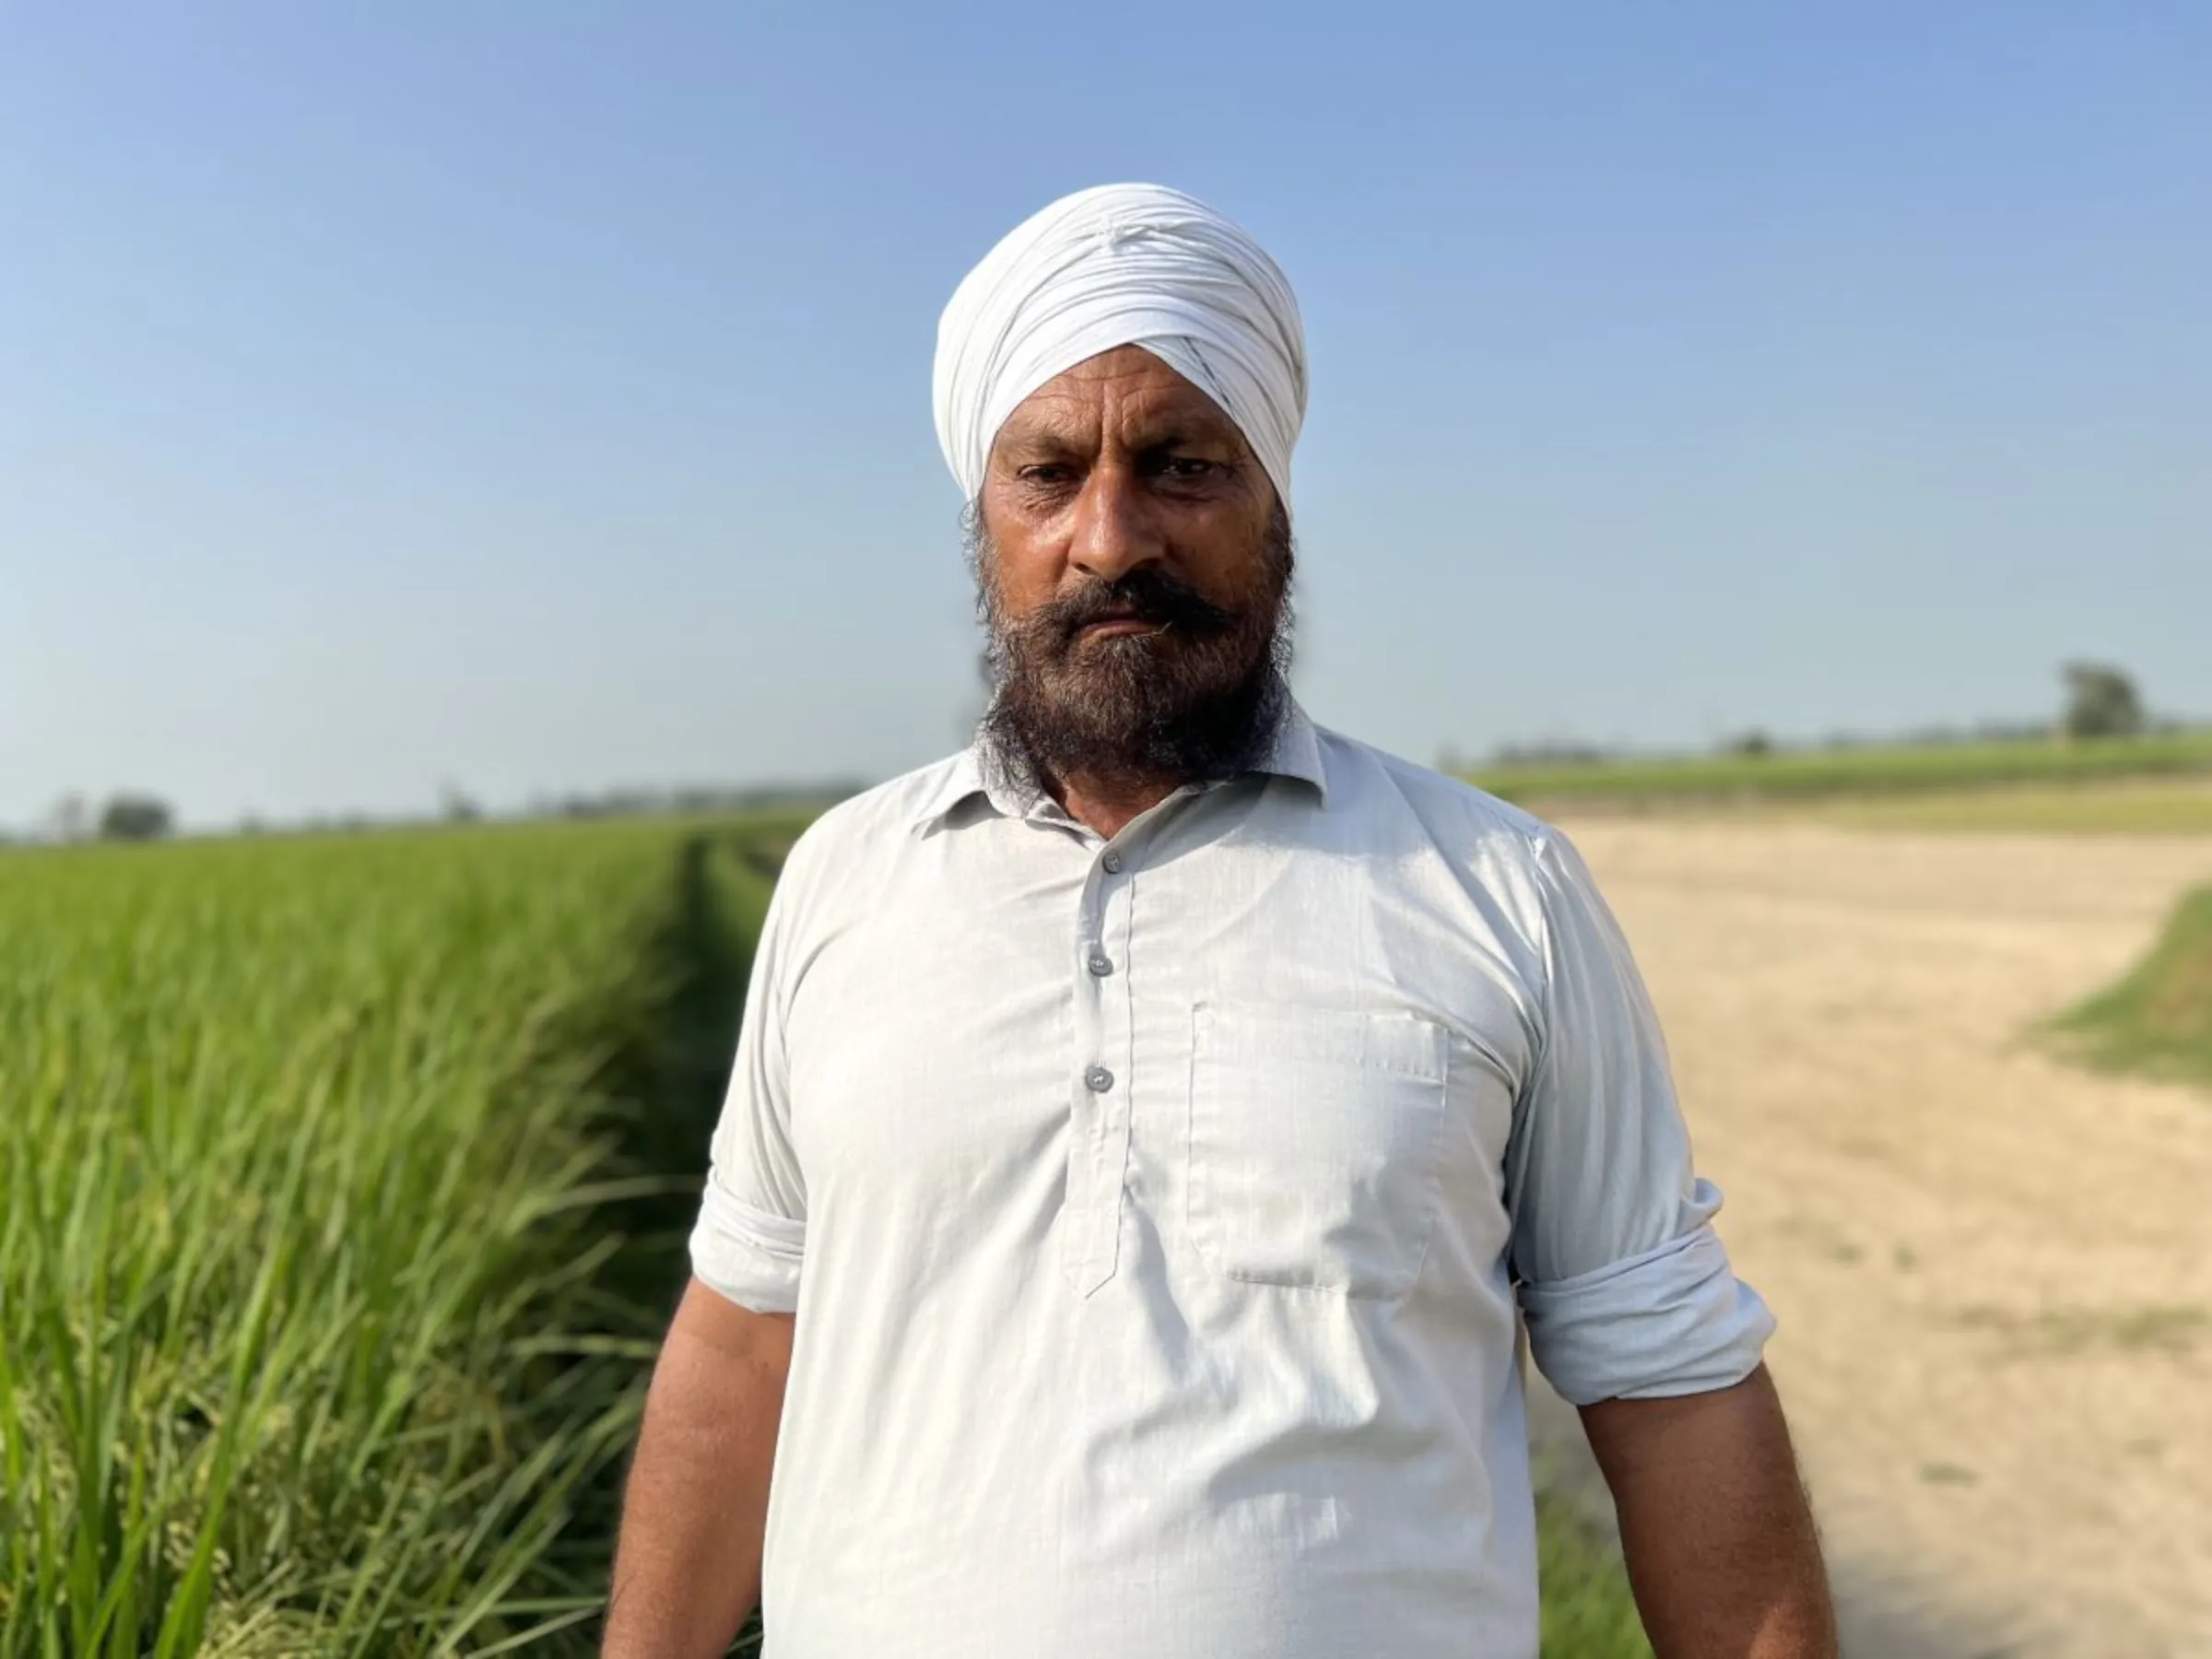 Farmer Gurucharan Singh Bhuttar has changed how he grows wheat to adopt practices such as zero-tilling of the ground, which helps the soil store more carbon, in turn generating carbon credits, in Karnal district, Haryana state, India, September 1, 2023. Thomson Reuters Foundation/Bhasker Tripathi